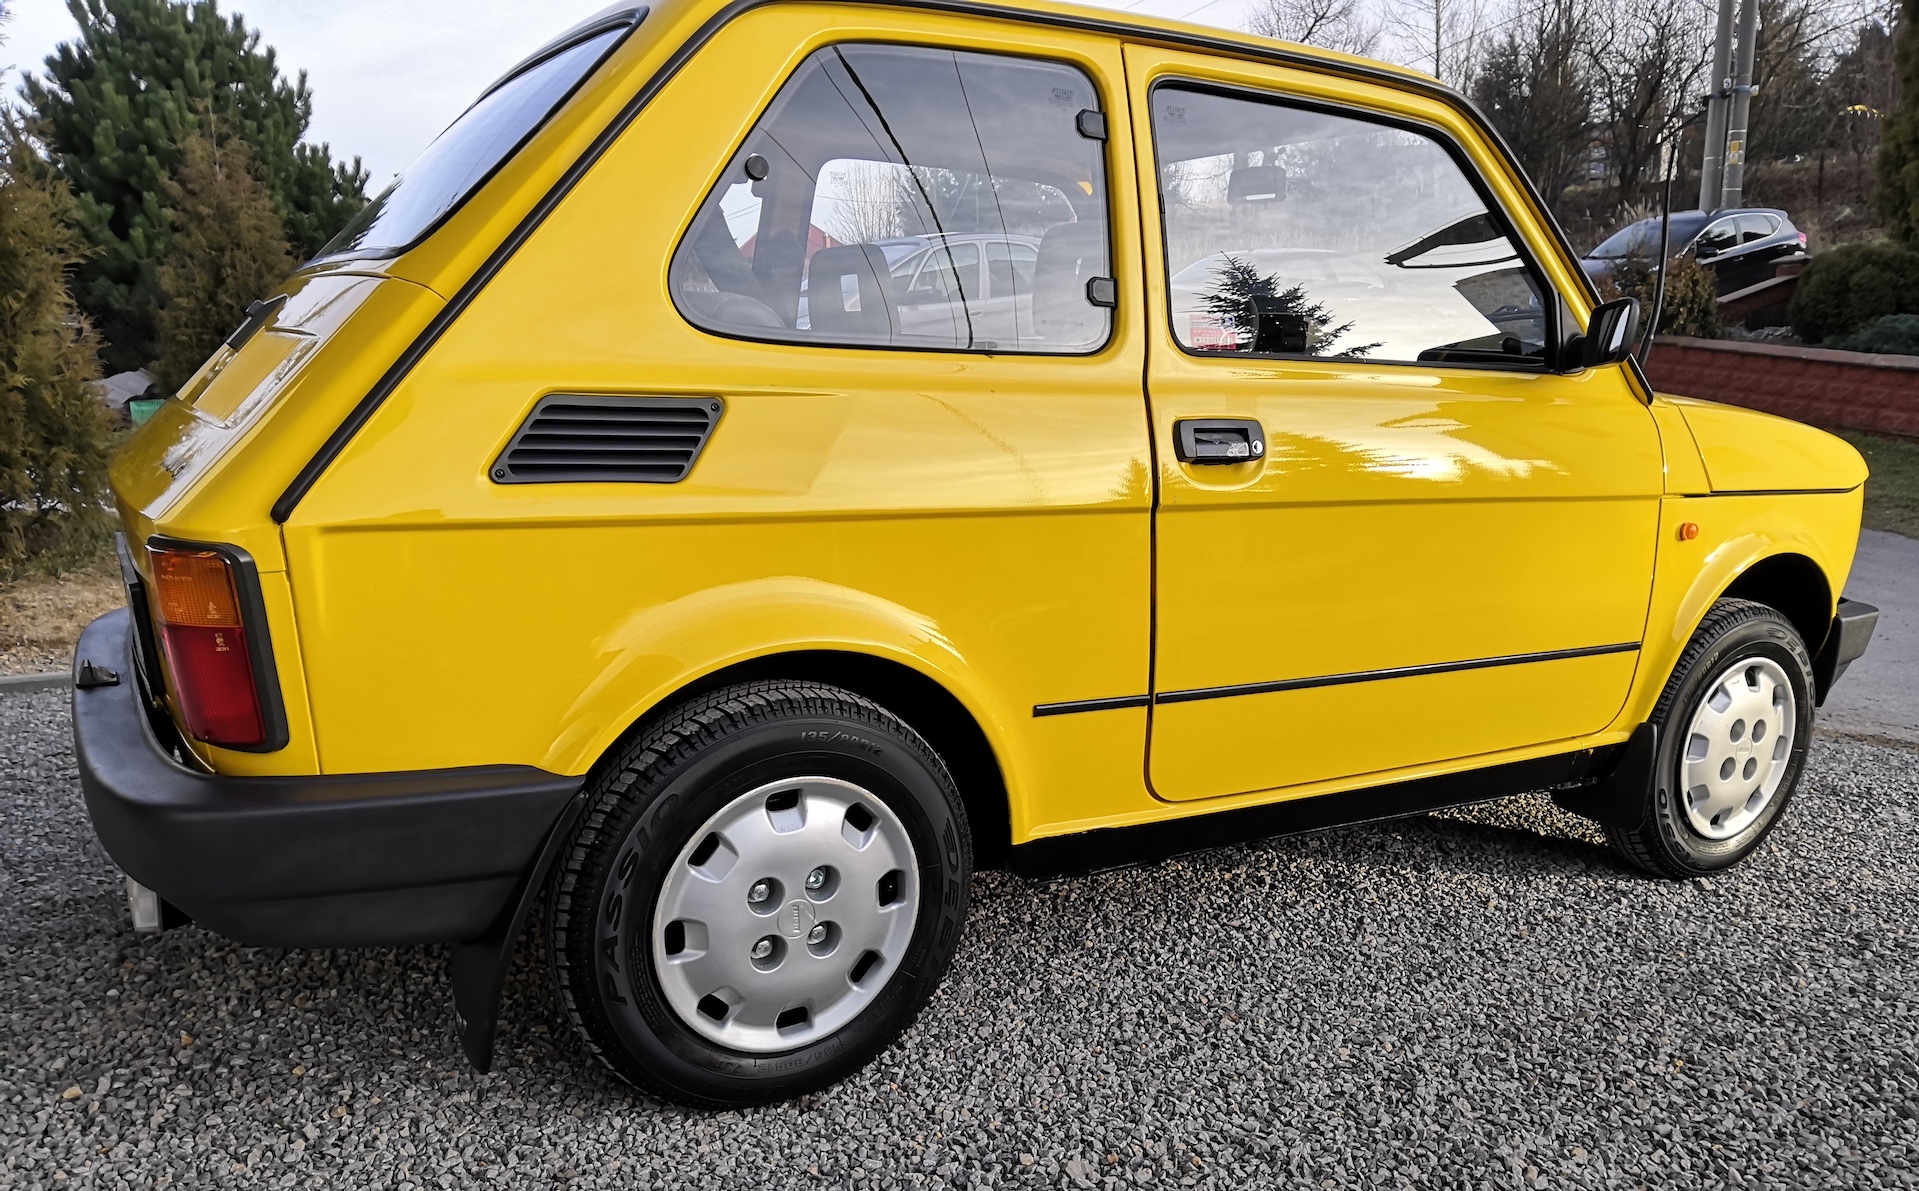 Fiat 126p The Brothers detailing